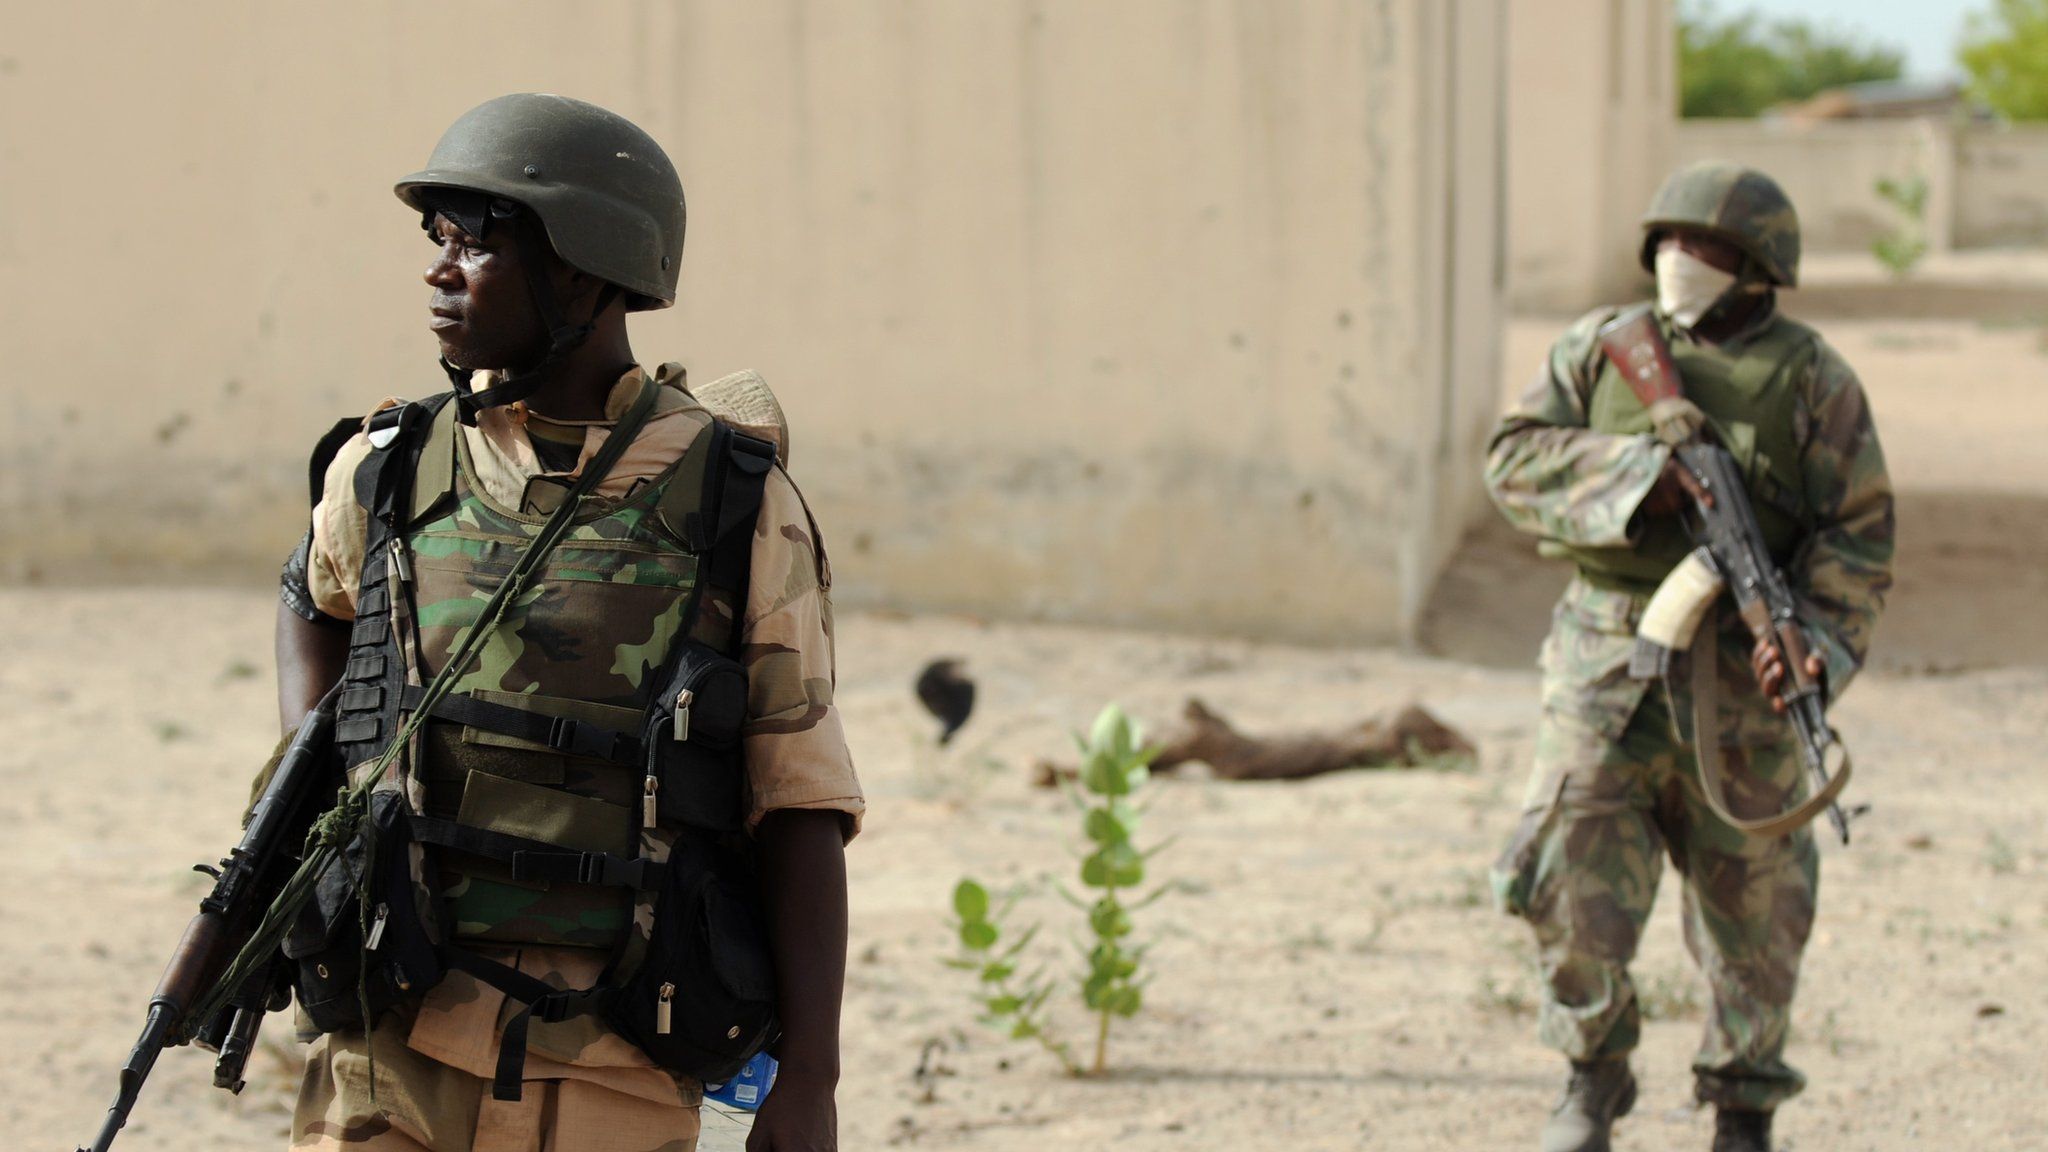 Nigerian soldiers on patrol in Borno state - 2013 picture